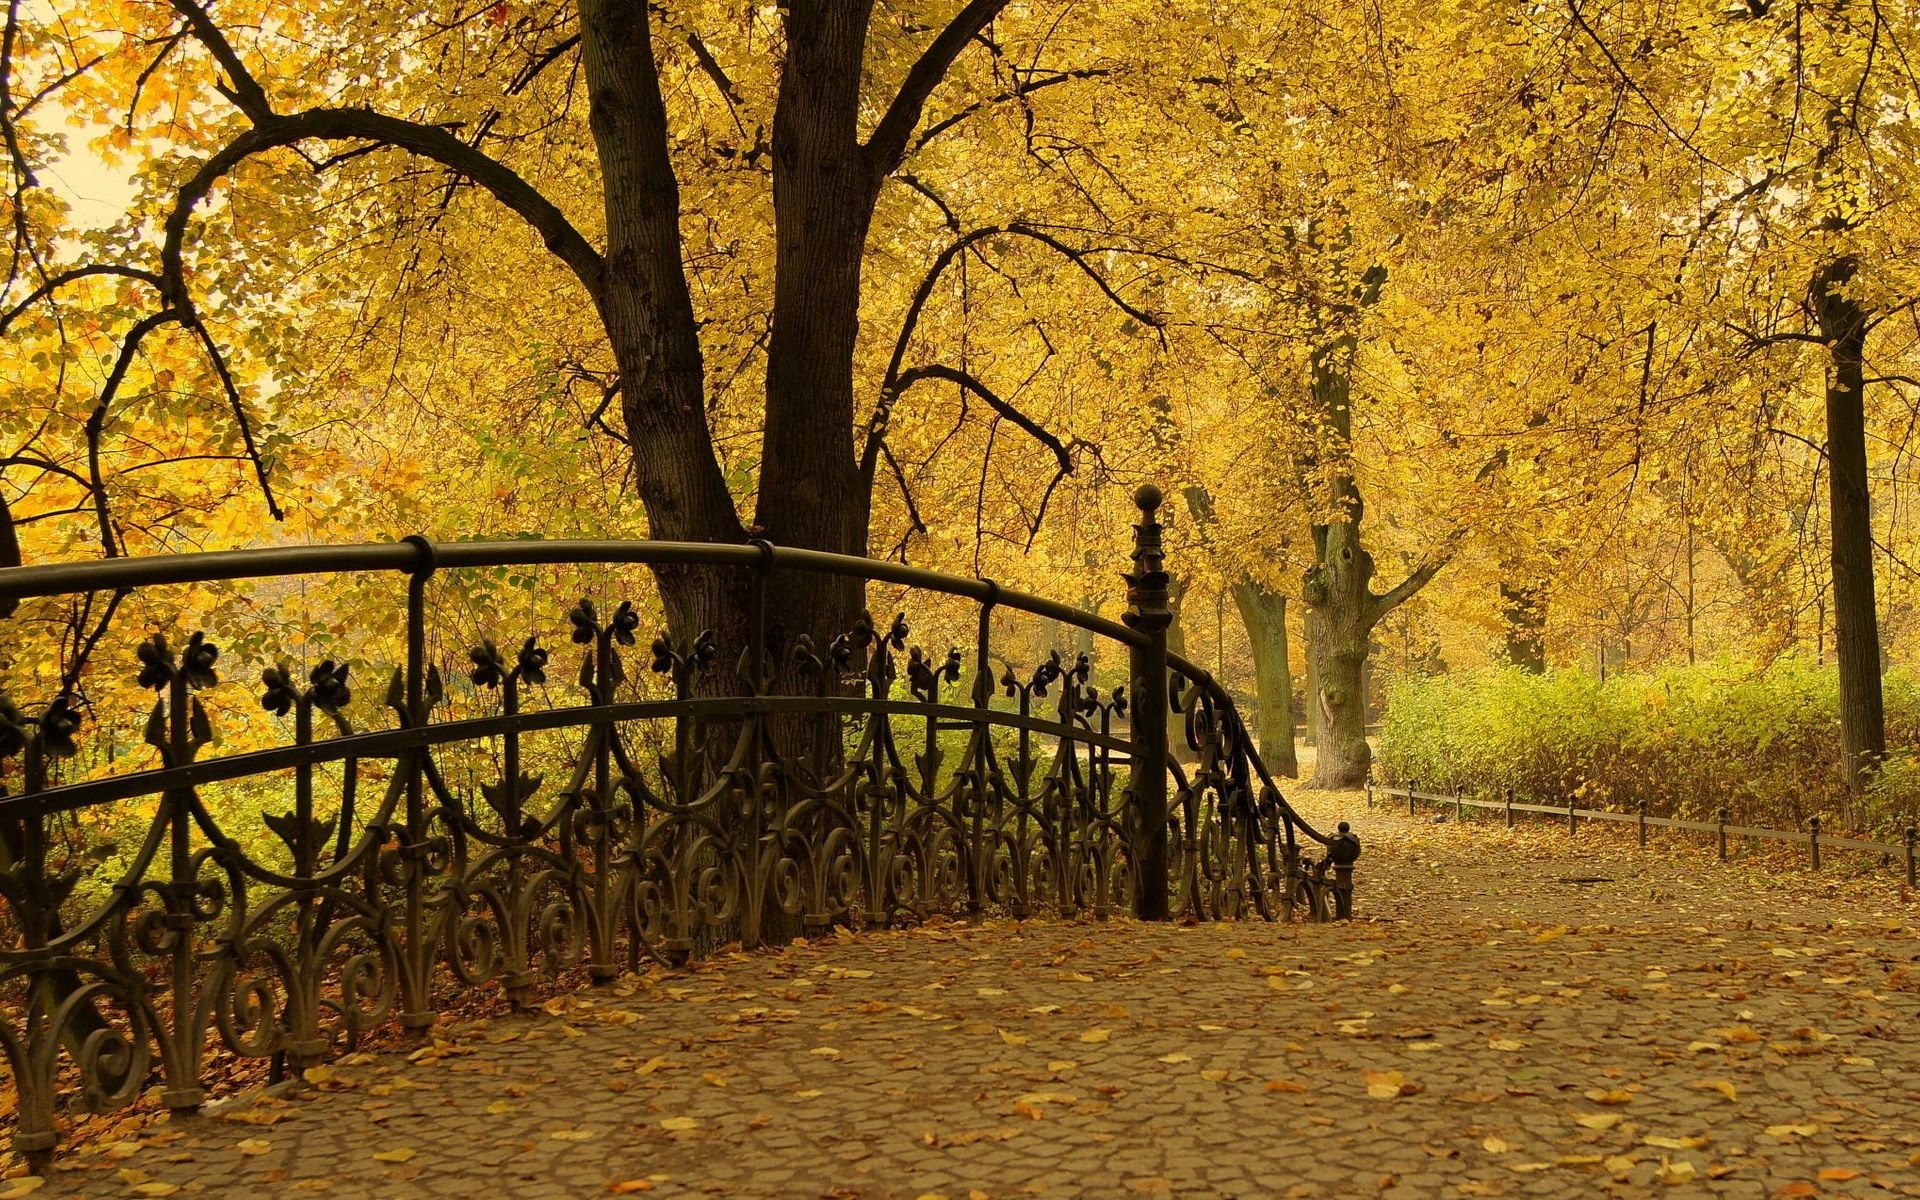 80479 download wallpaper park, nature, trees, autumn, leaves, bridge, railings, handrail screensavers and pictures for free